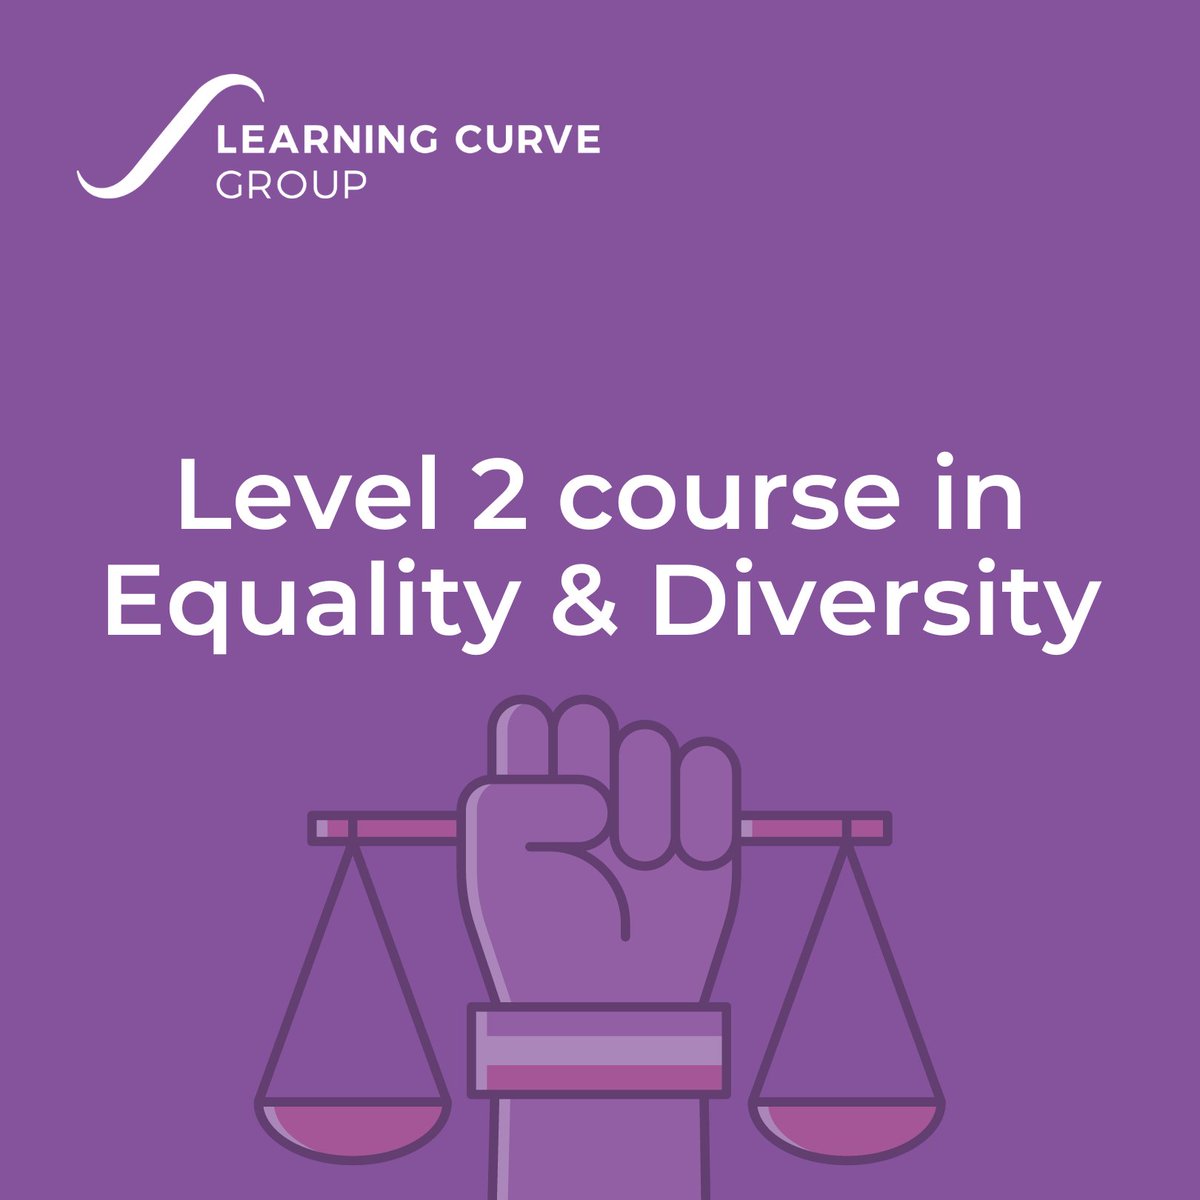 57% of UK businesses regard equality, diversity and inclusion as priorities when recruiting staff. We offer a level 2 course in Equality and Diversity which may be available to you for free. See the link below to sign up 👇⚖️ow.ly/z7kf50OXZuT